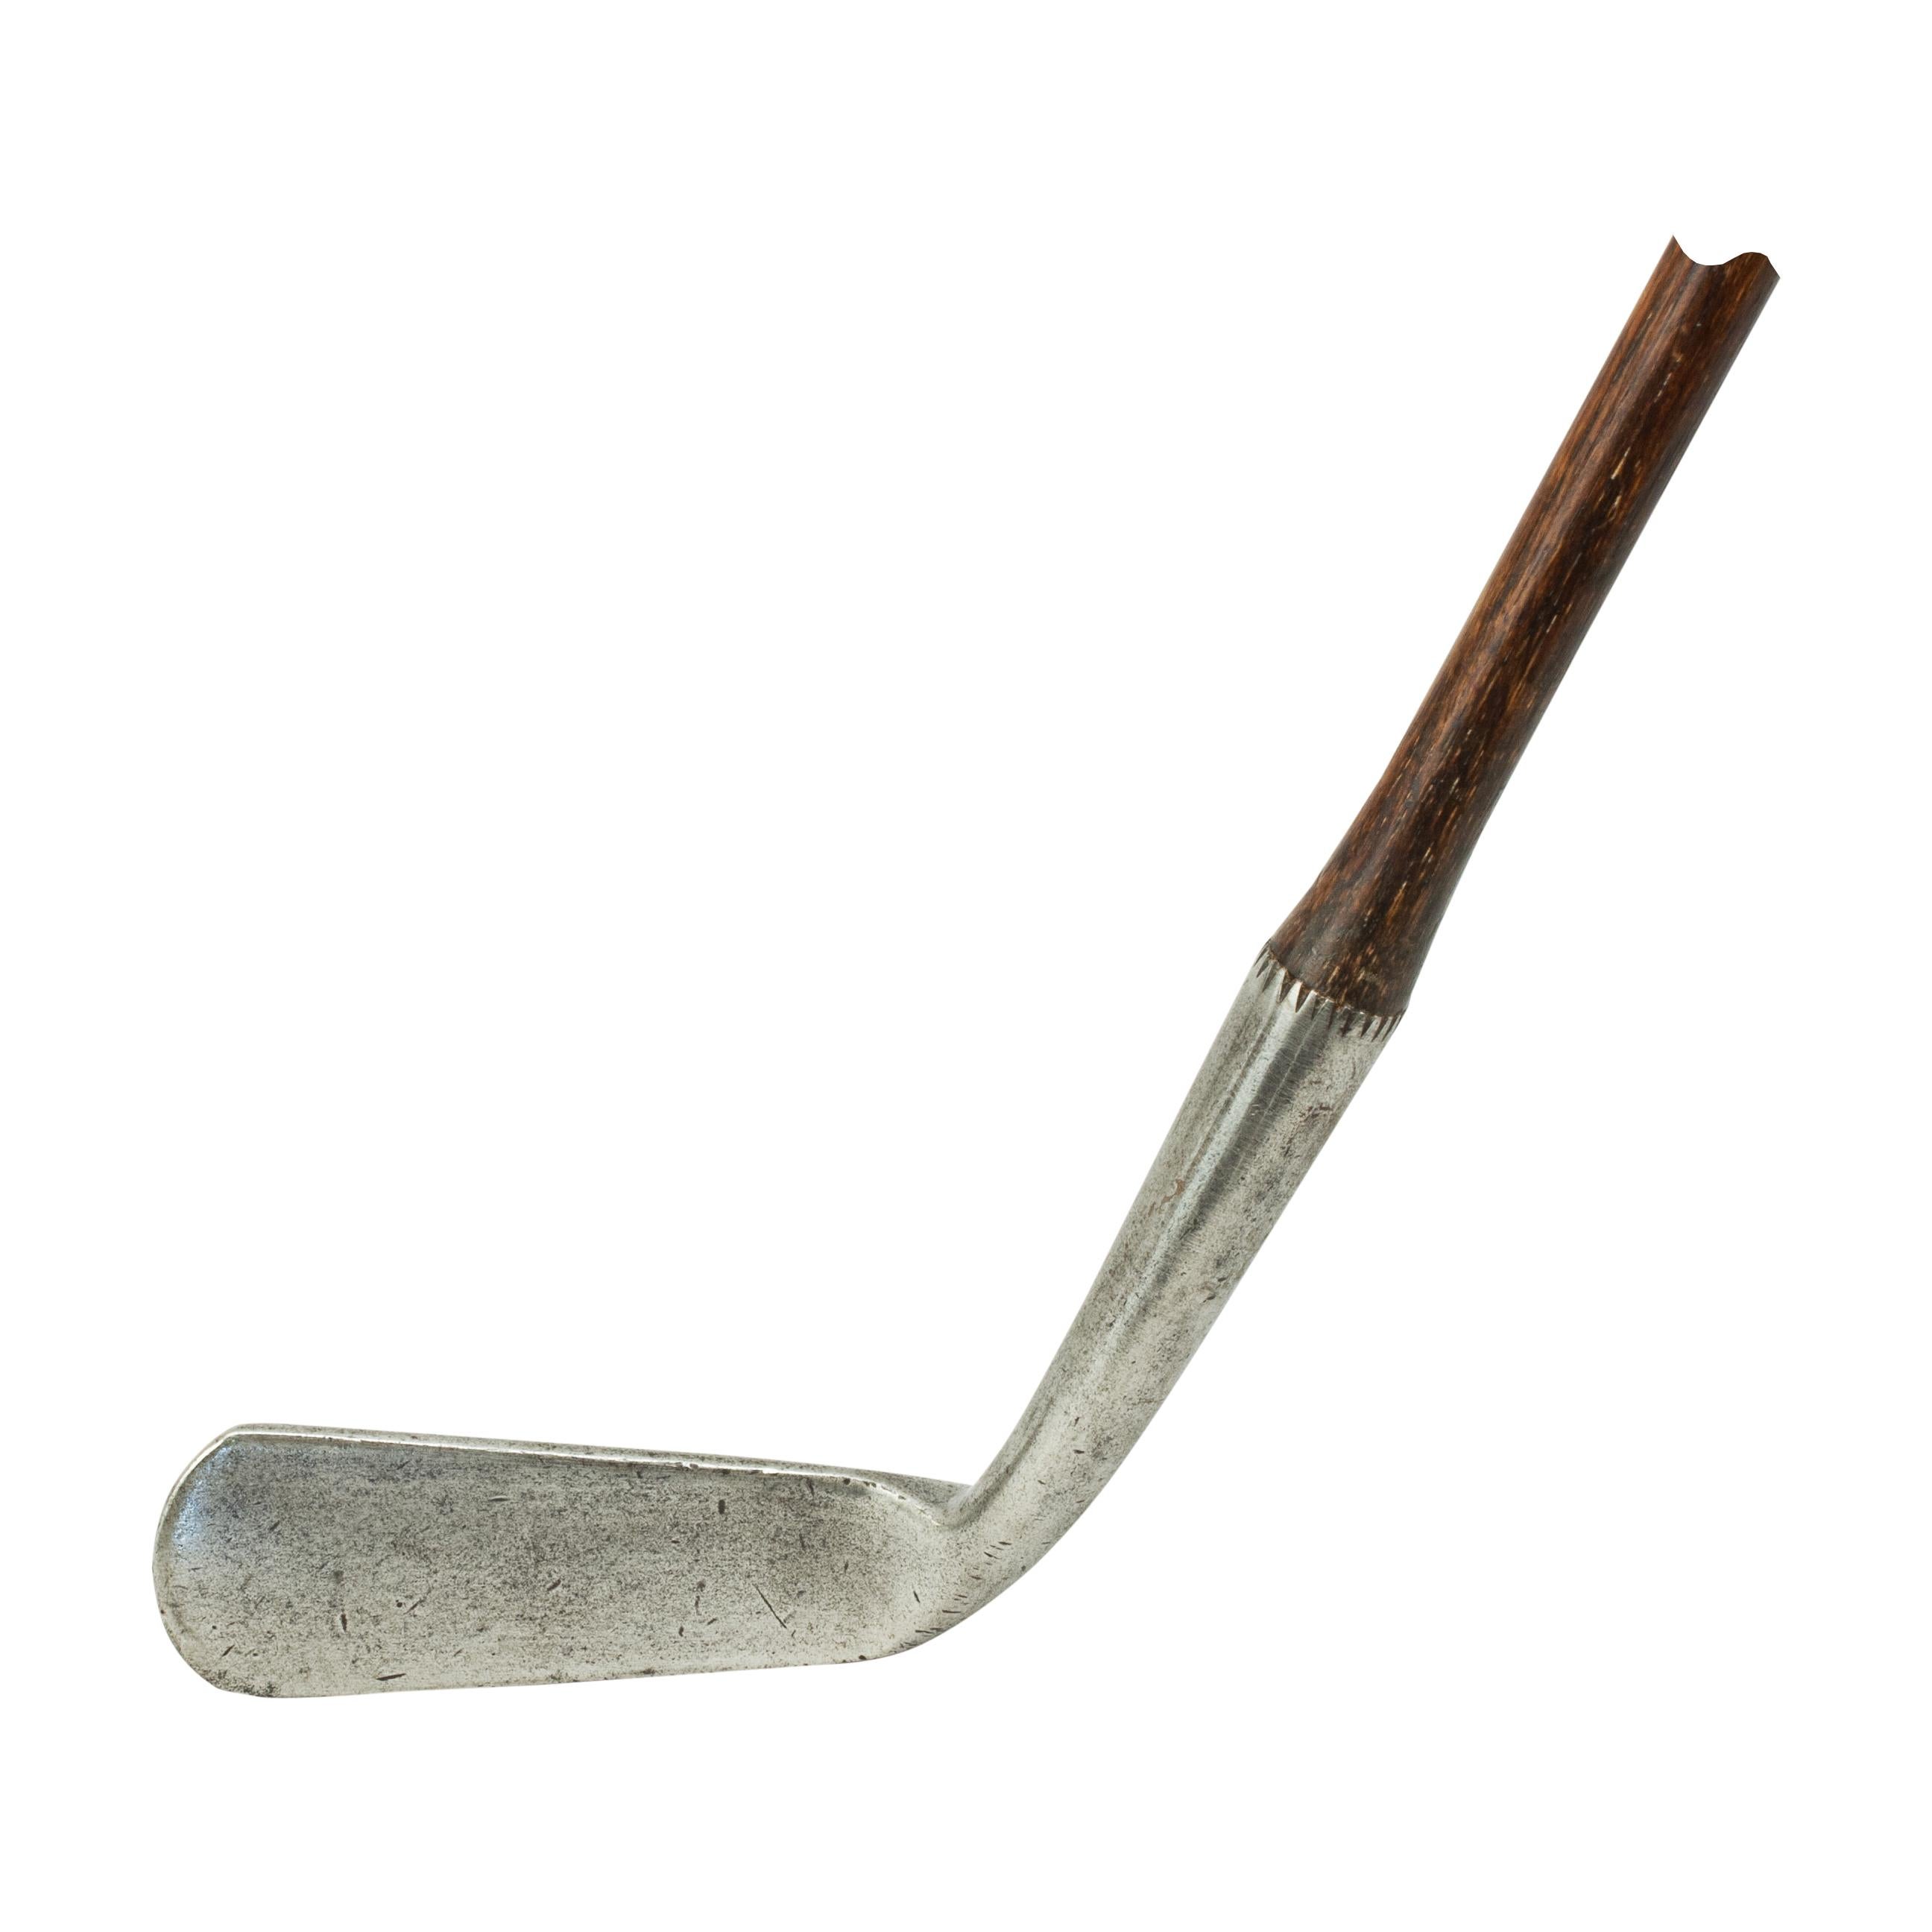 Vintage Hickory Golf Club, Wry Neck Putter, Willie Park, St Andrews.
A fine and nicely weighted smooth faced offset putter by Willie Park of St. Andrews. Hickory shafted with leather grip. On the rear of the club head is stamped 'W. Park, Special,